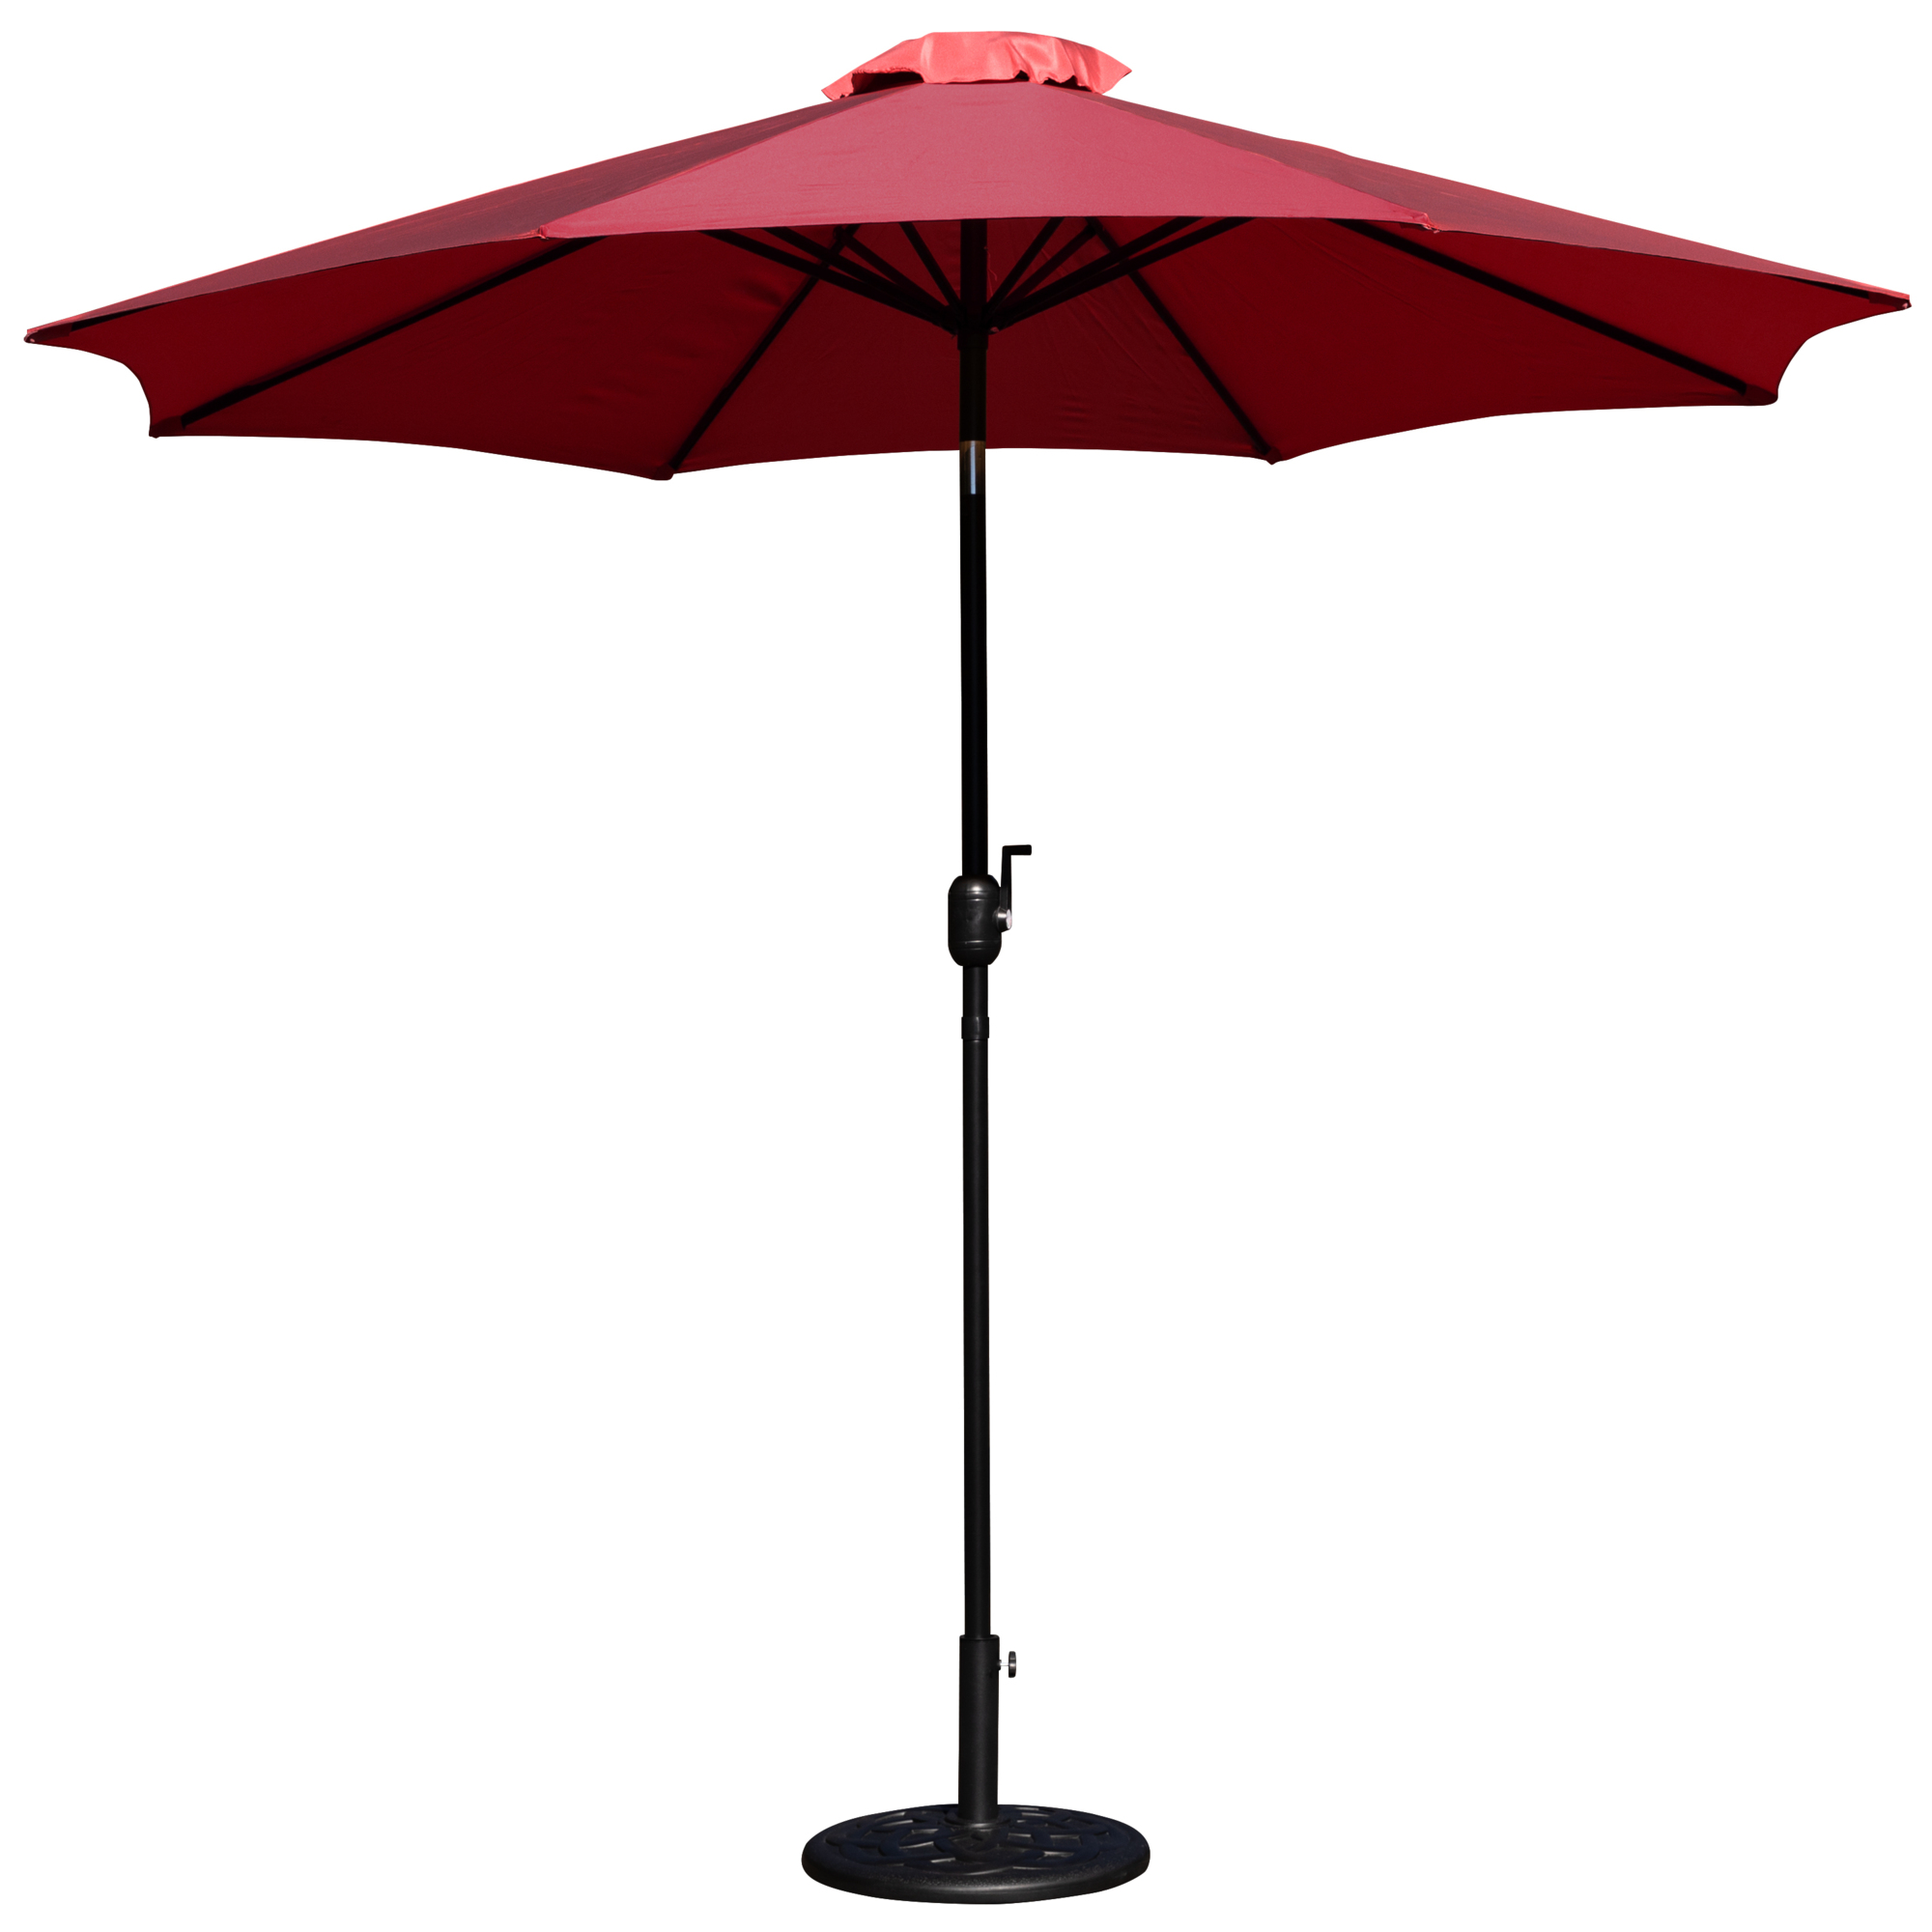 Flash Furniture, Red 9ft. Umbrella and Black Cement Base, 2 PC Set, Canopy Diameter 9 ft, Shape Octagon, Model GM402003UB19RED